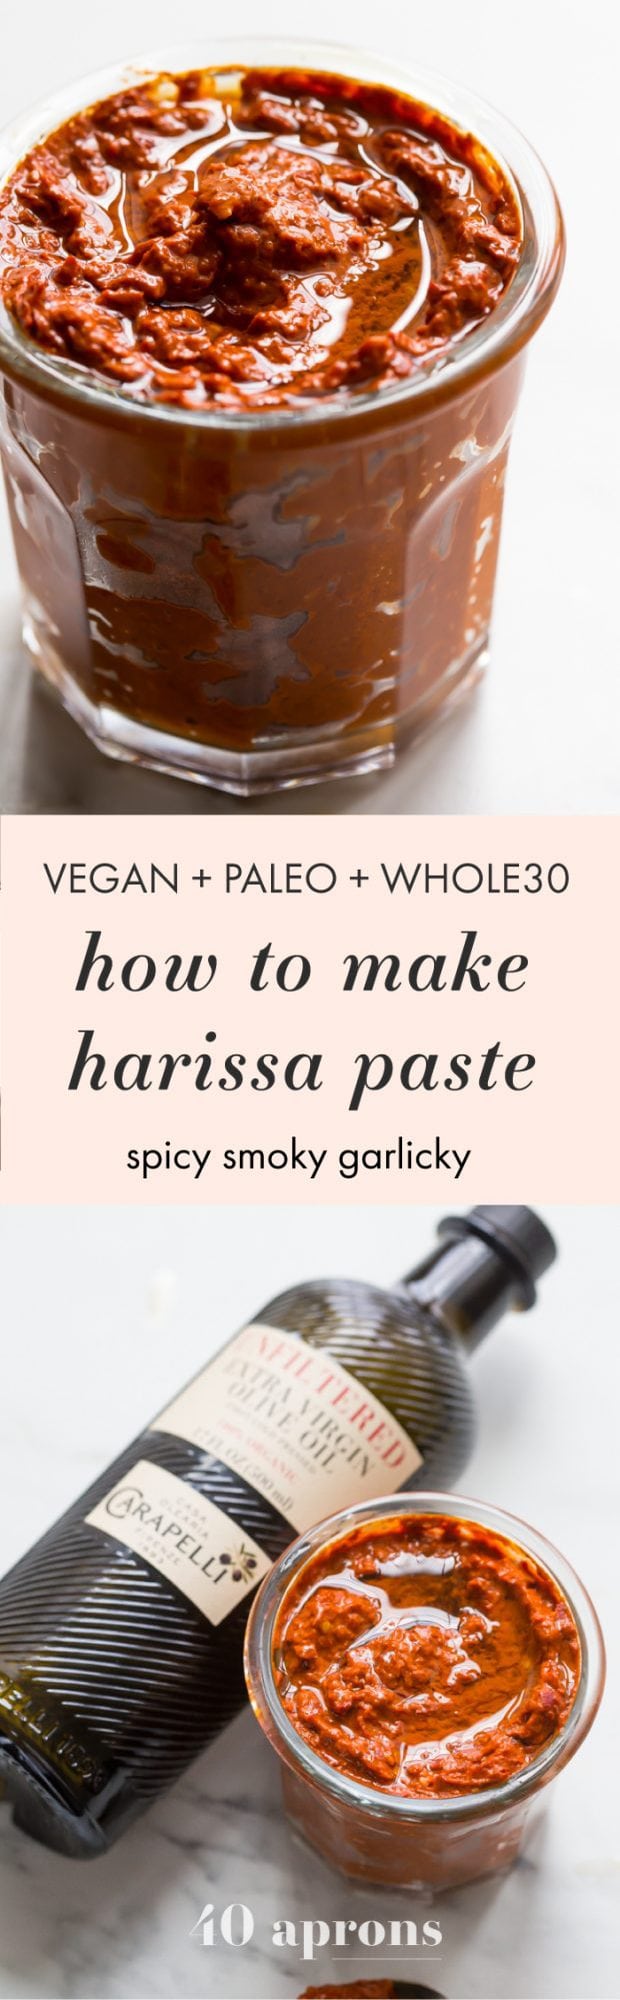 Want to learn how to make harissa? This harissa recipe is spicy, smoky, and garlicky, and it tastes so, so good on pretty much everything. With only a few ingredients, learning how to make harissa is a cinch! Make sure you check out my how to make harissa video, too